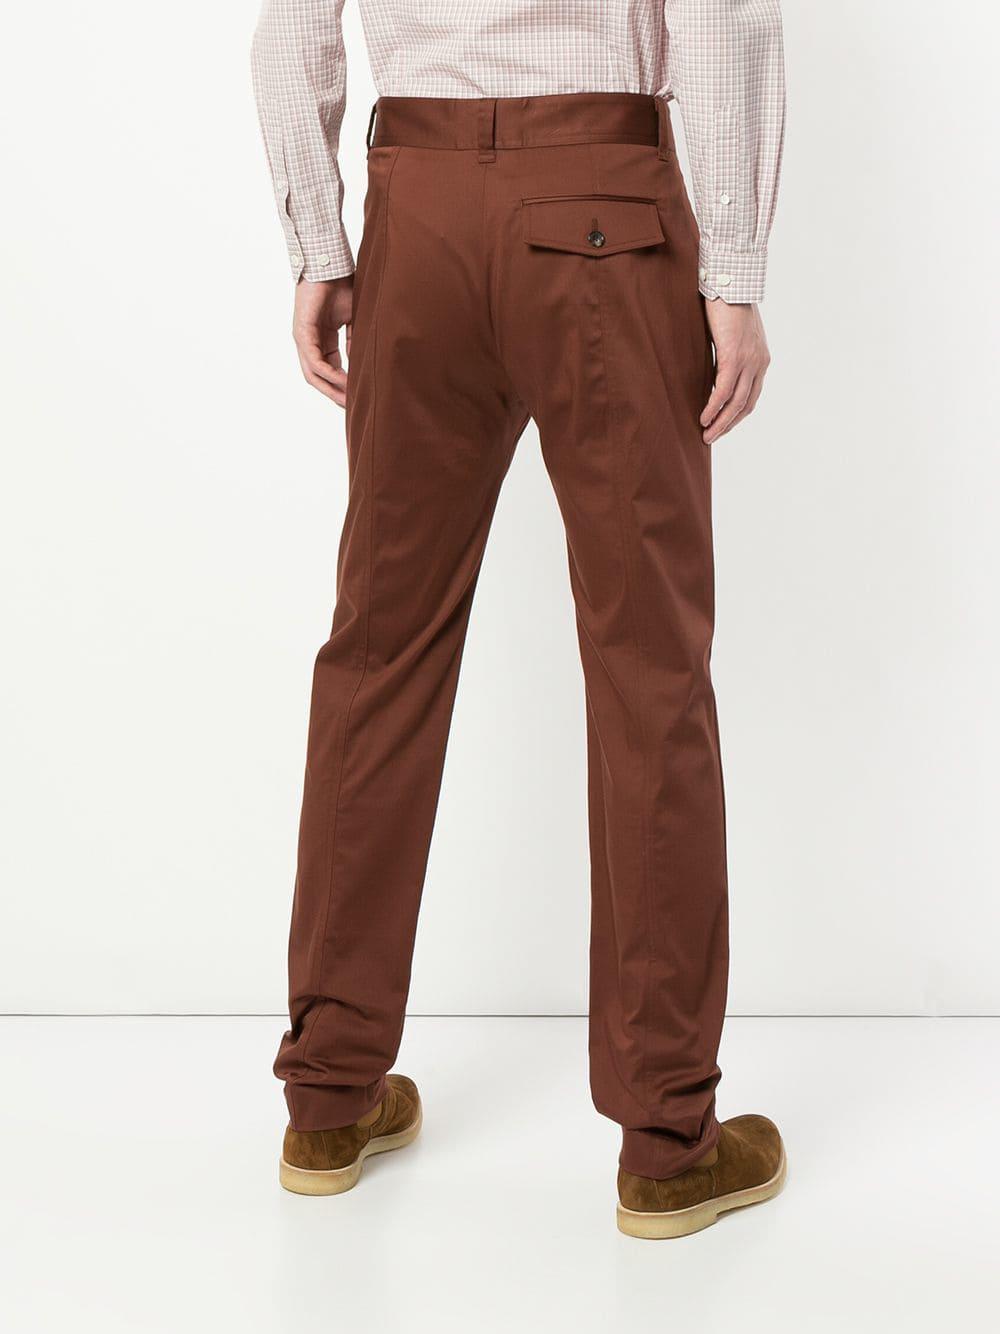 Cerruti 1881 Cotton Tailored Trousers in Brown for Men - Lyst